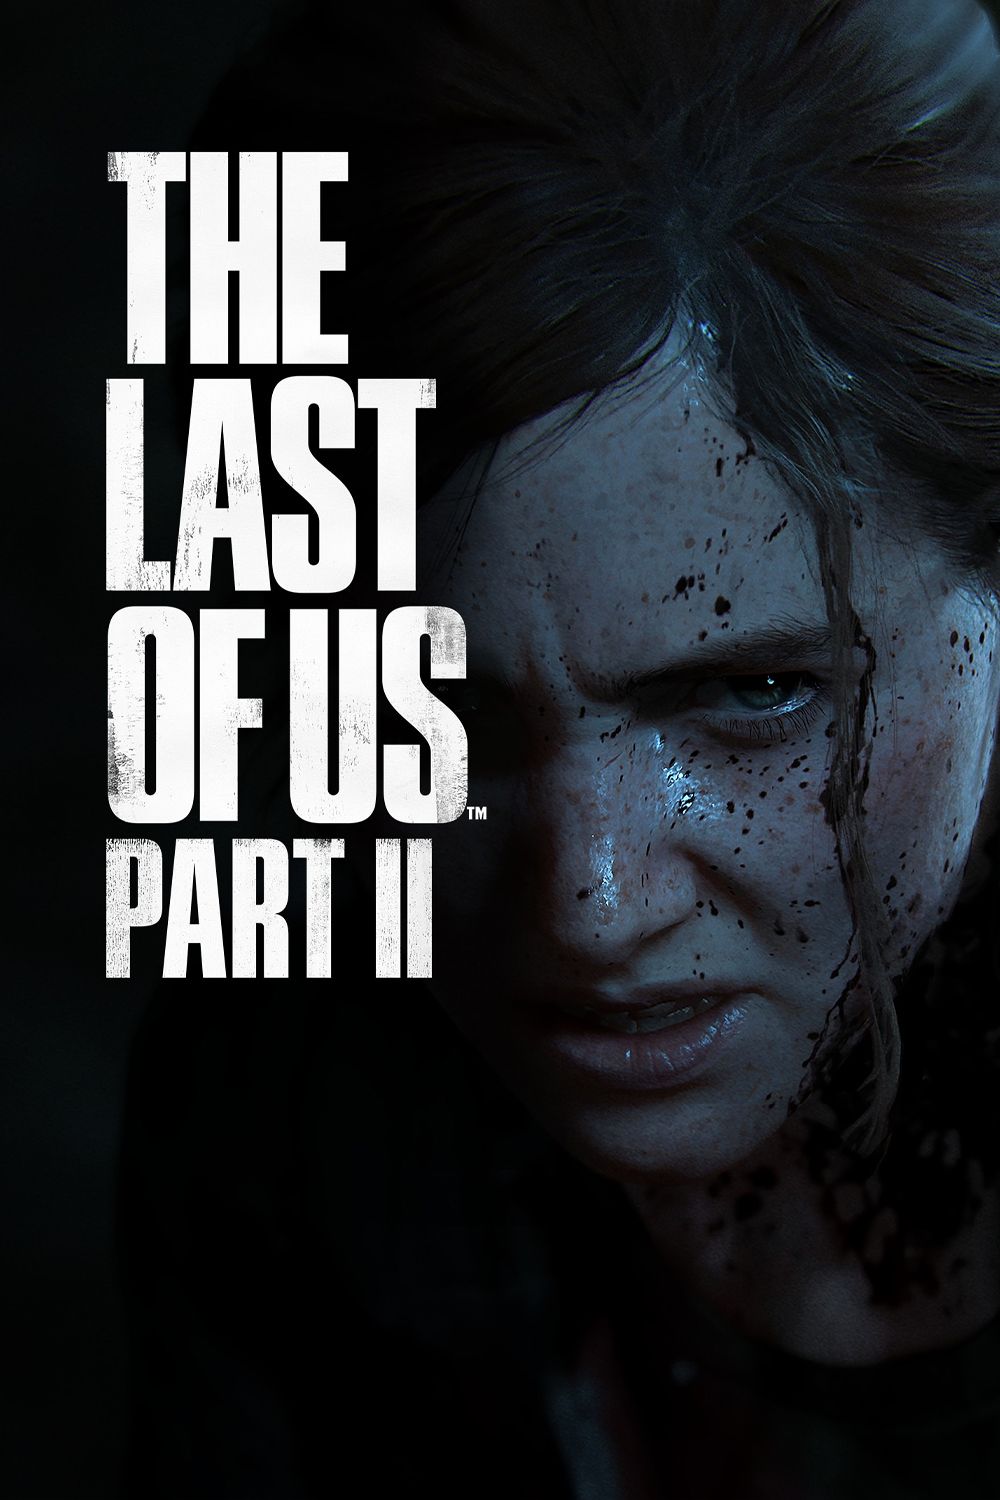 ARE YOU GETTING THE $10 PS5 REMASTER UPGRADE?! #thelastofus #ps5 #thel, the  last of us part 2 remastered